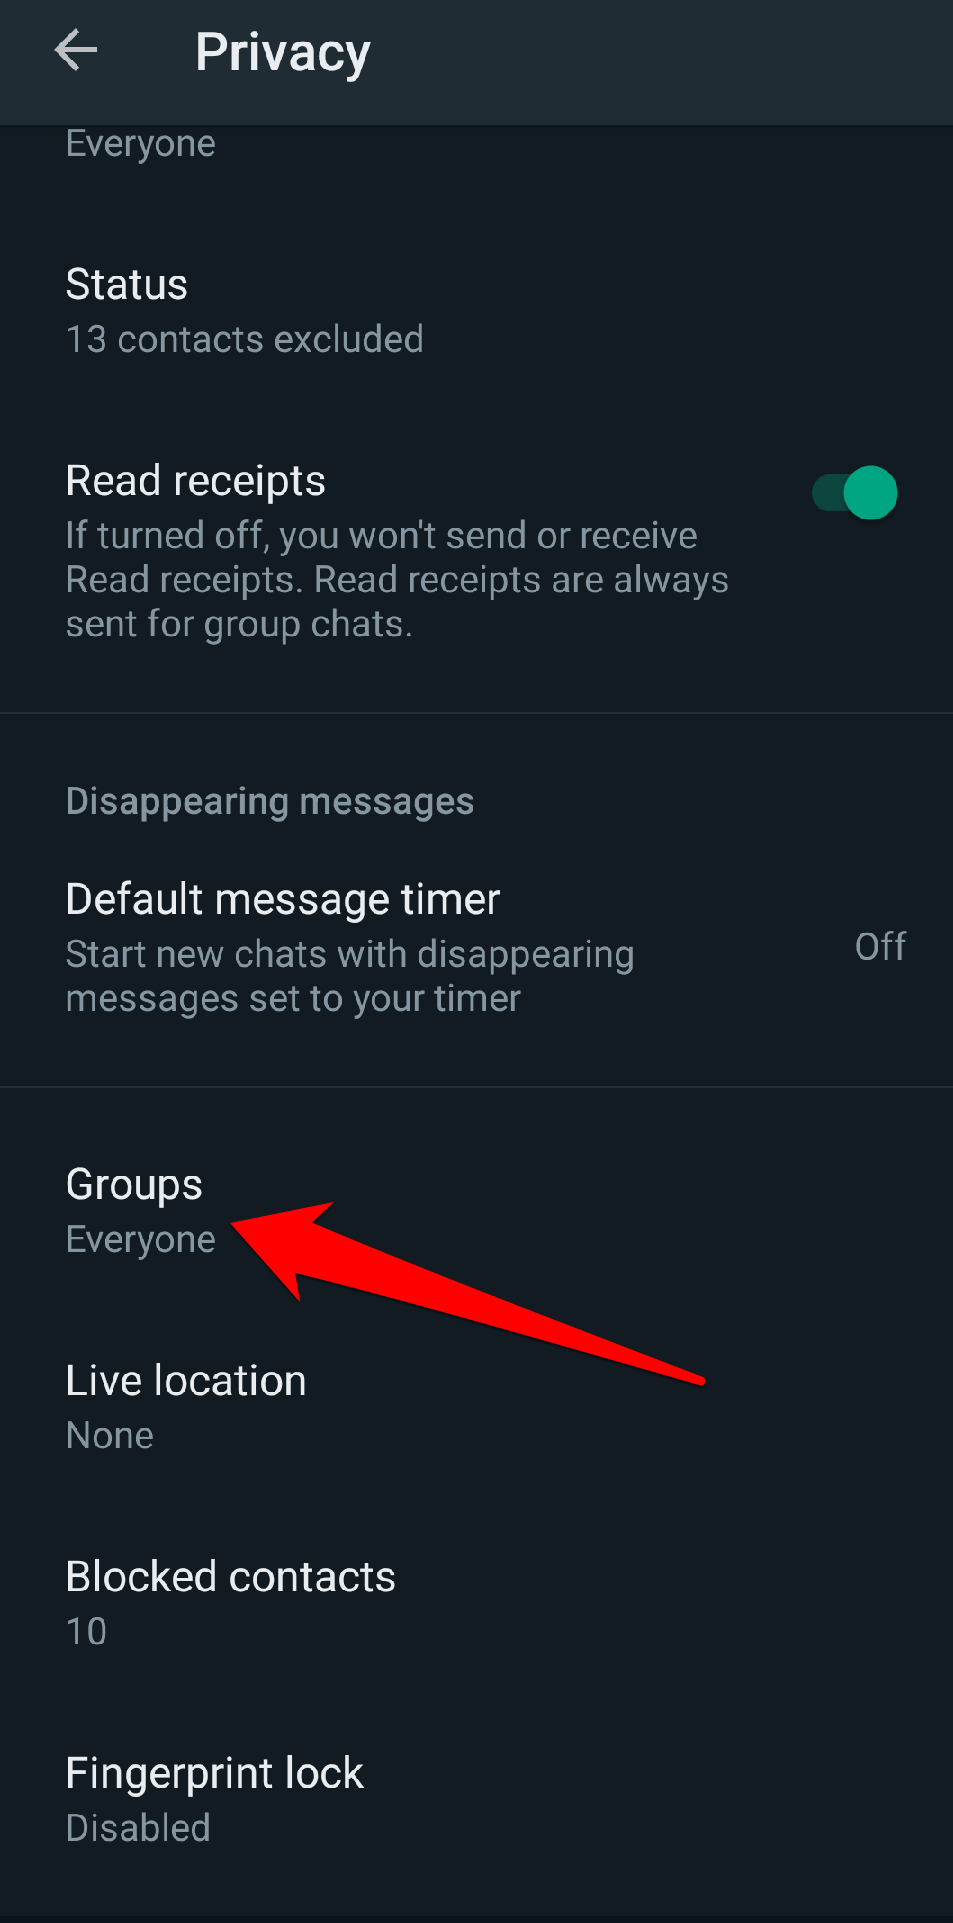 Scroll down and tap on "Groups."